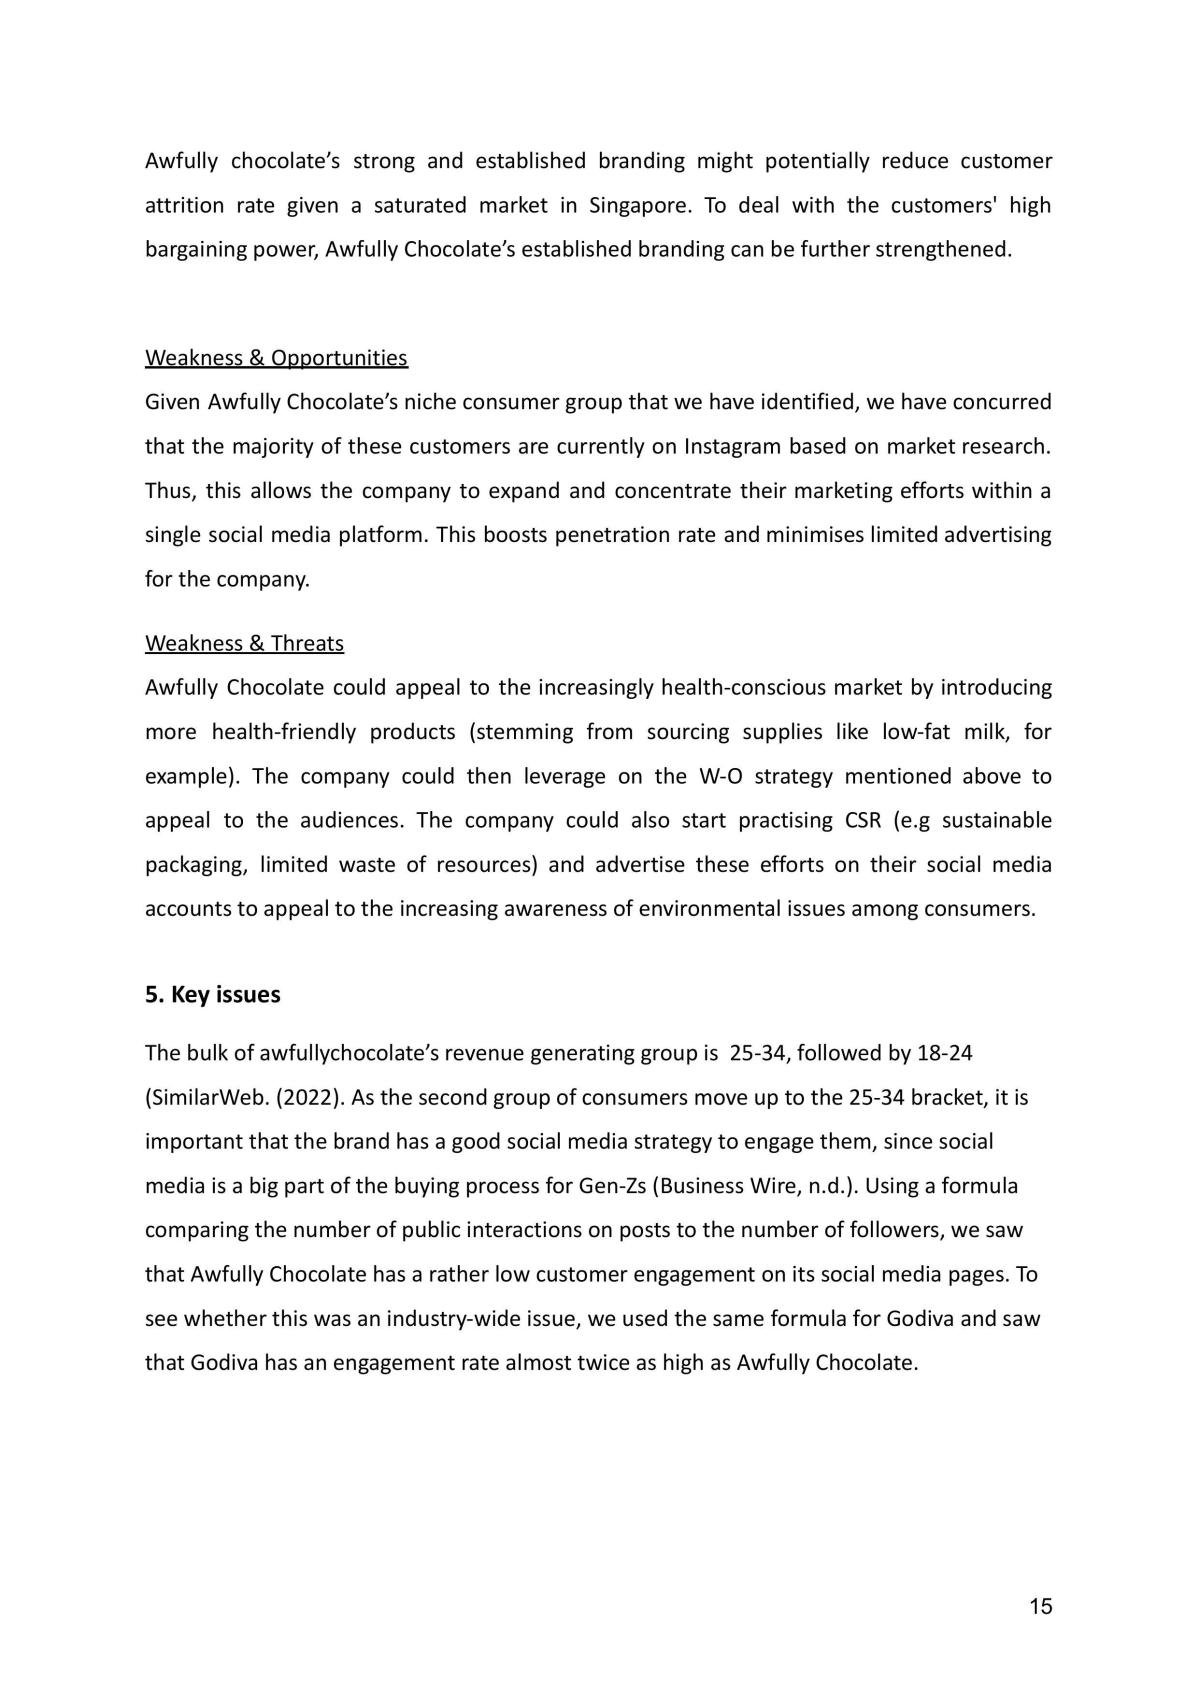 Final Group Project Report, COMM346 - Communication Strategies in the  Digital Age - SMU